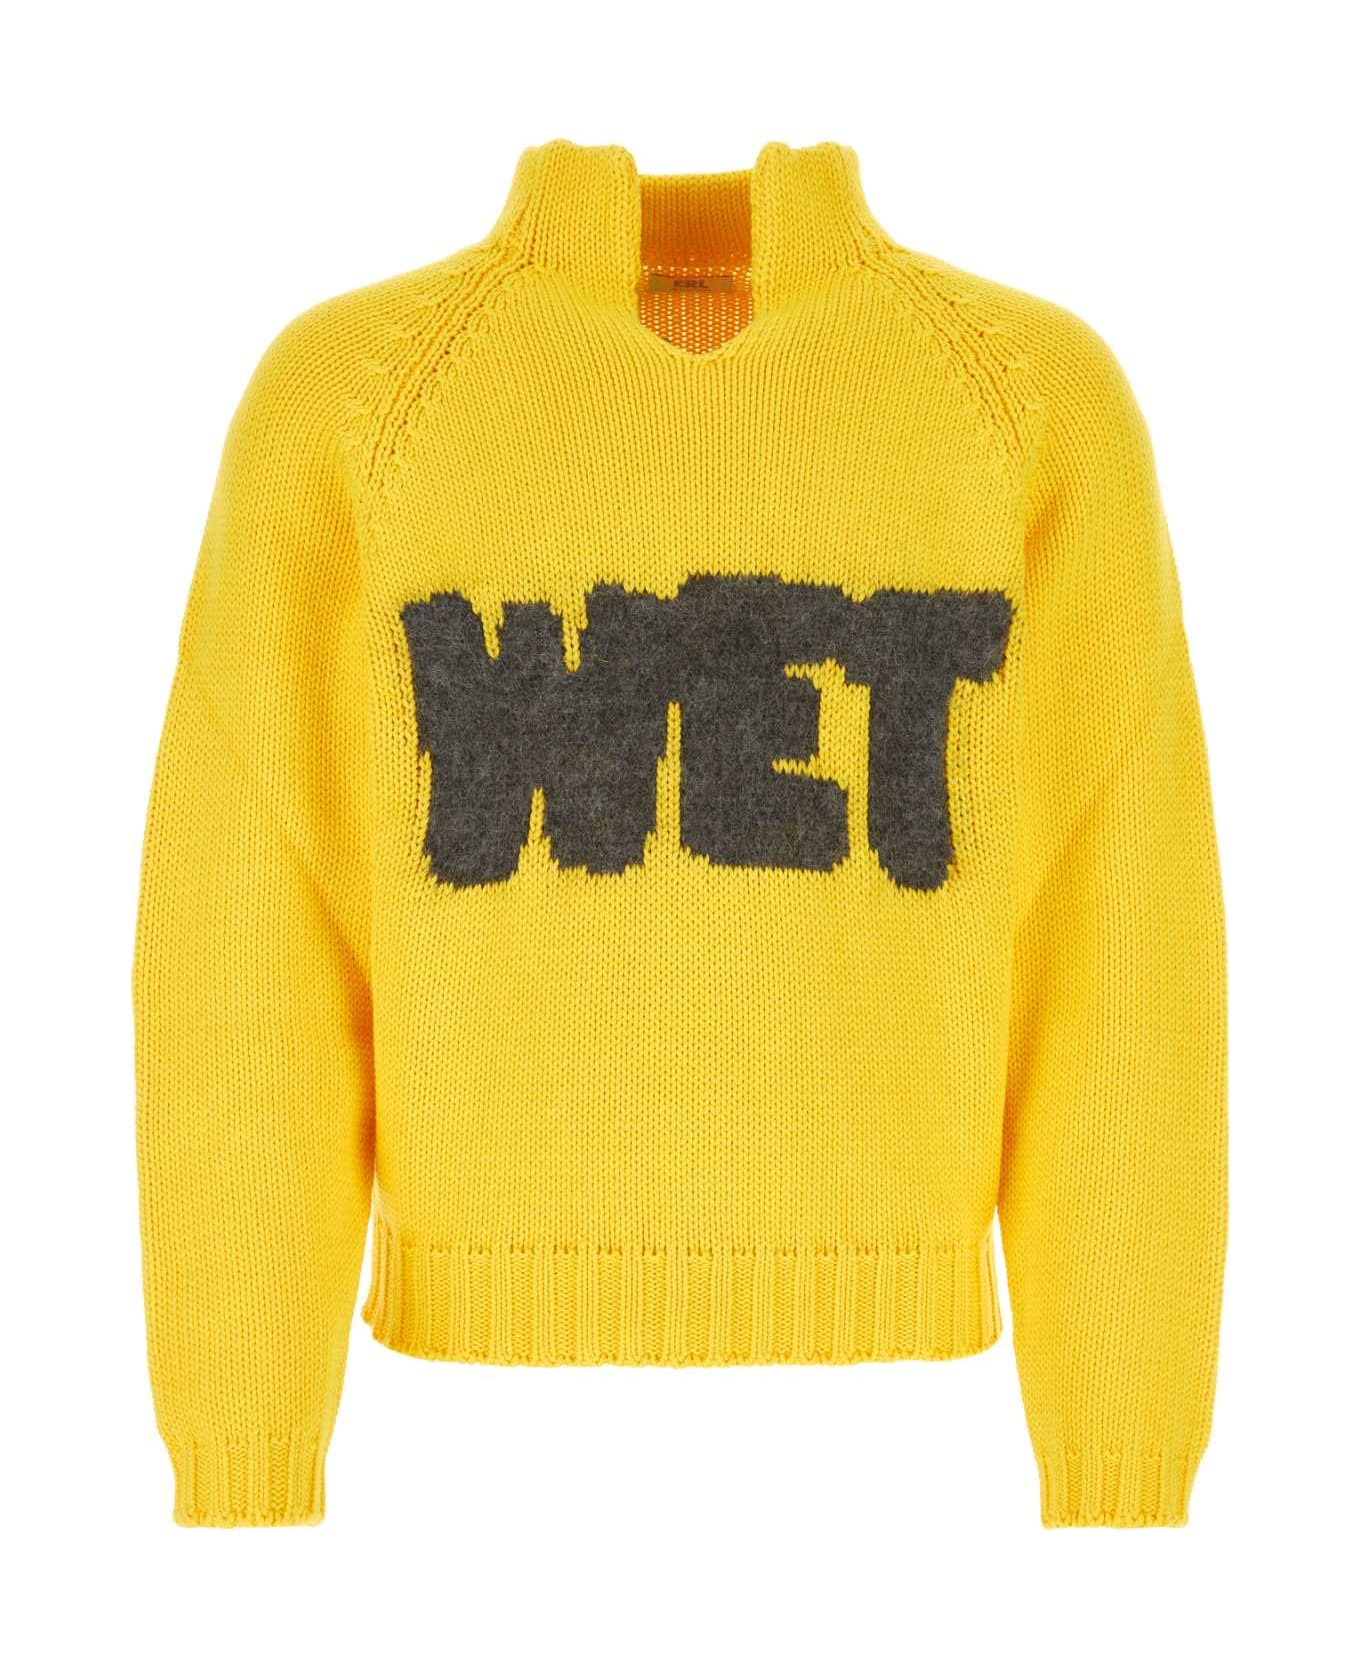 ERL Yellow Cotton Blend Sweater - YELLOW